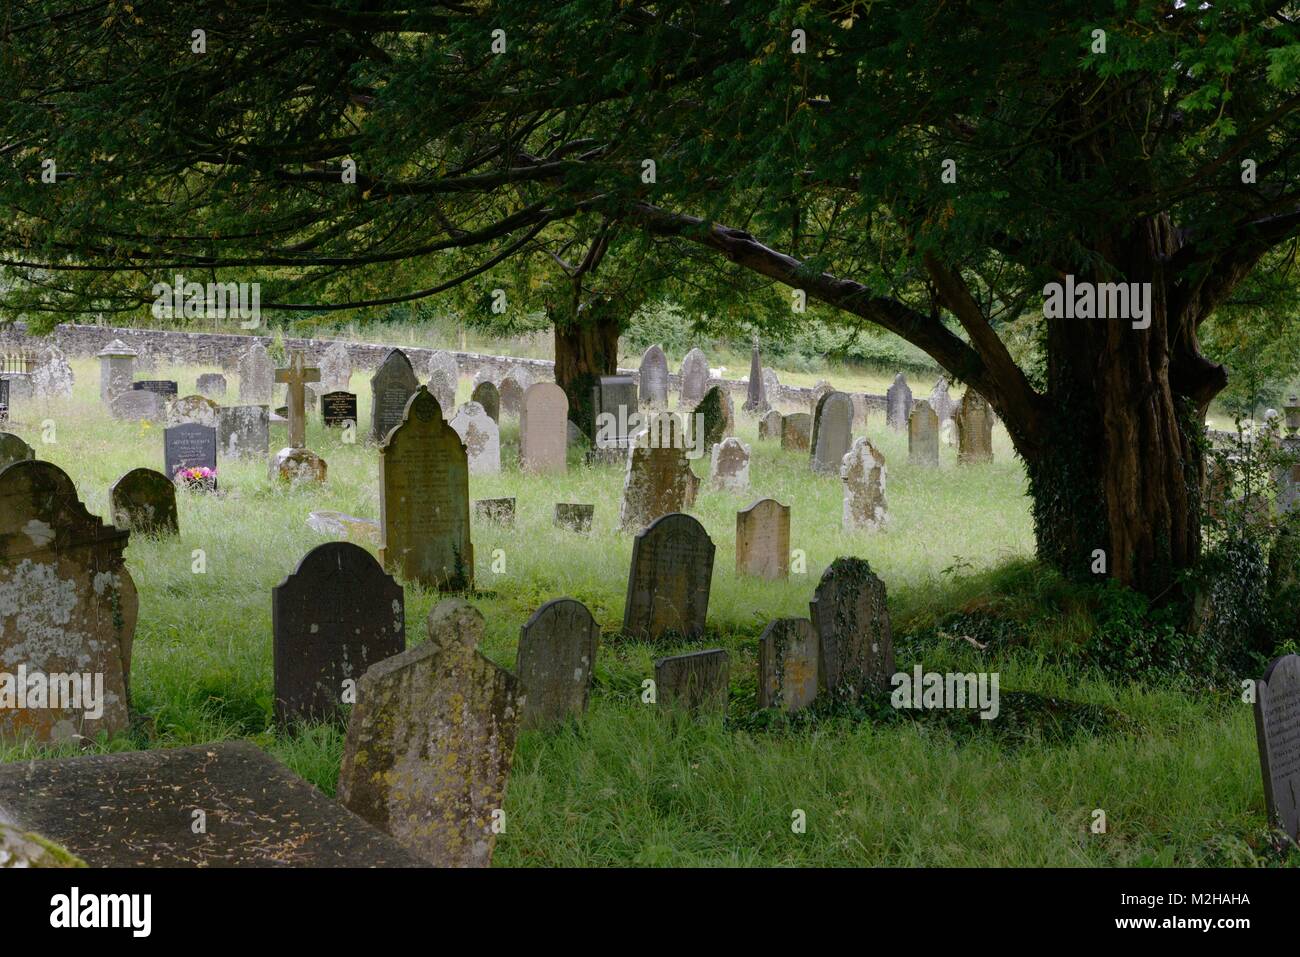 Graveyard at St Michaels Church, Talley, built in the 18th Century, Wales, UK. Stock Photo